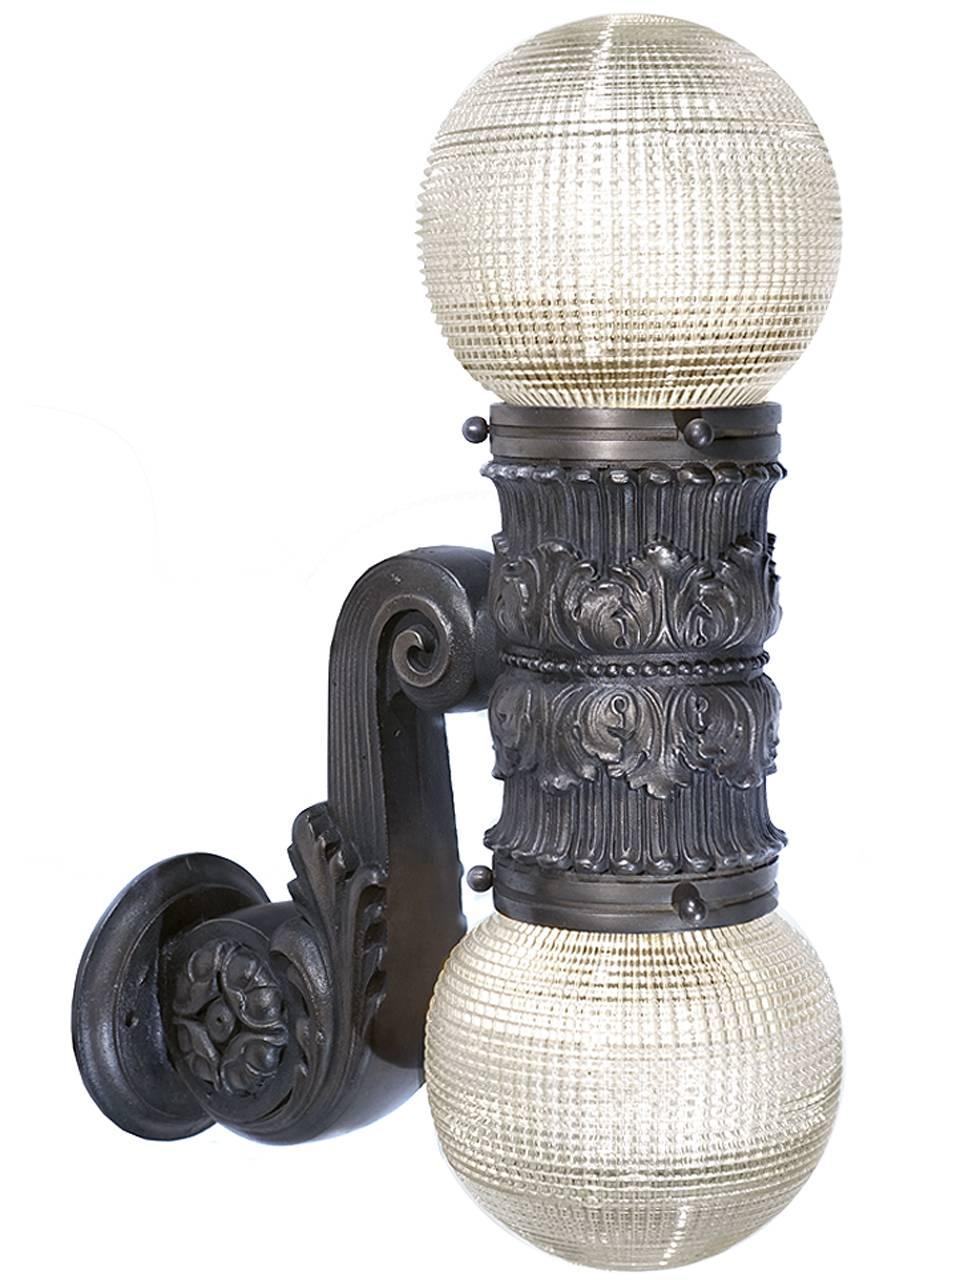 These lamps are by Dankmar Adler and Louis Sullivan.
The bronze castings are ornate and heavy for their size. They must have been salvaged from an important and detailed building. The 6 inch shades are prismatic glass in unique round shape. These